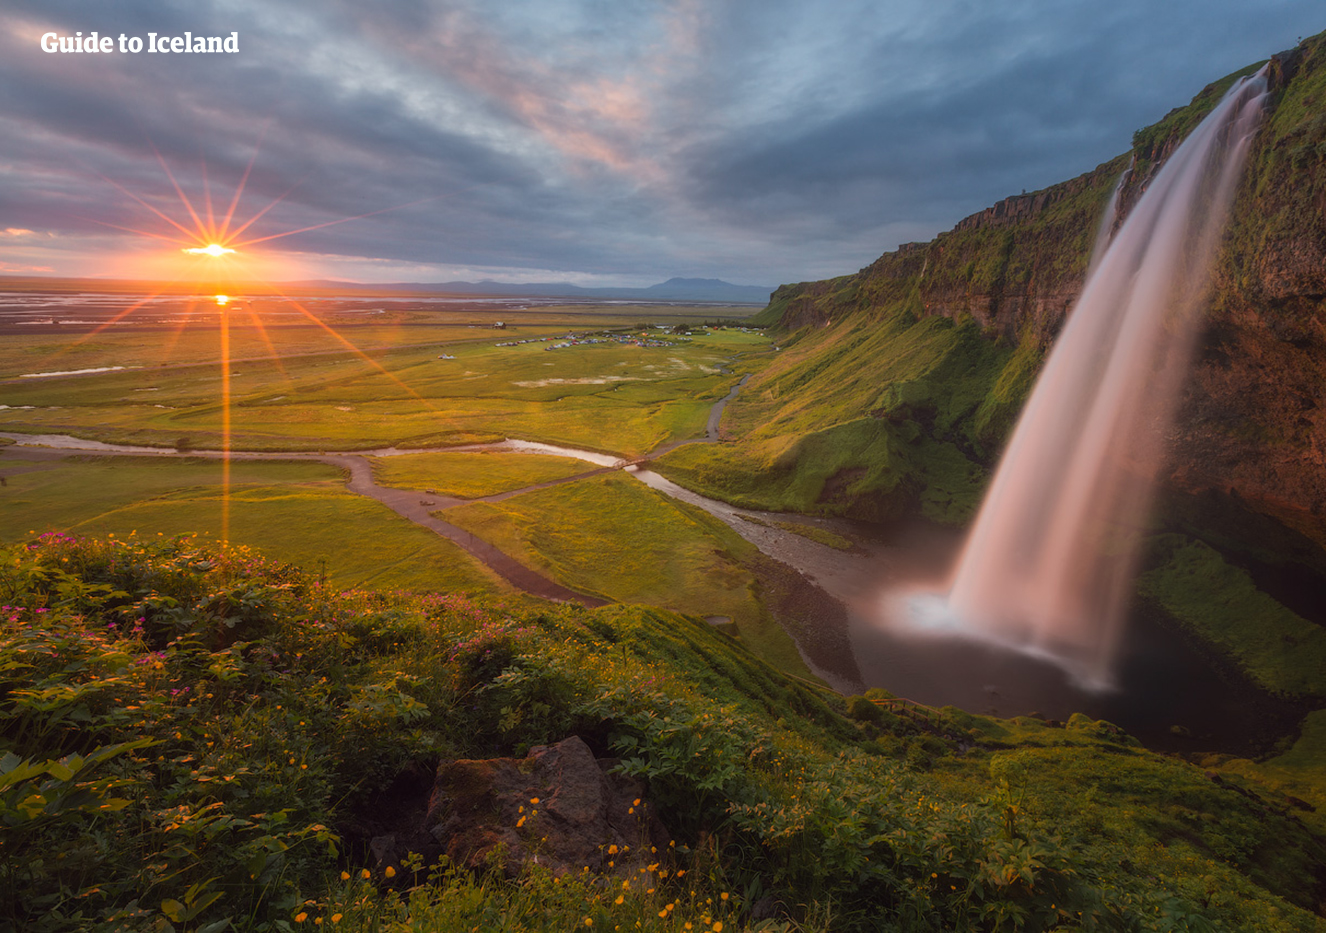 The magical cascade of Seljalandsfoss waterfall bathed in the light of the setting summer sun.